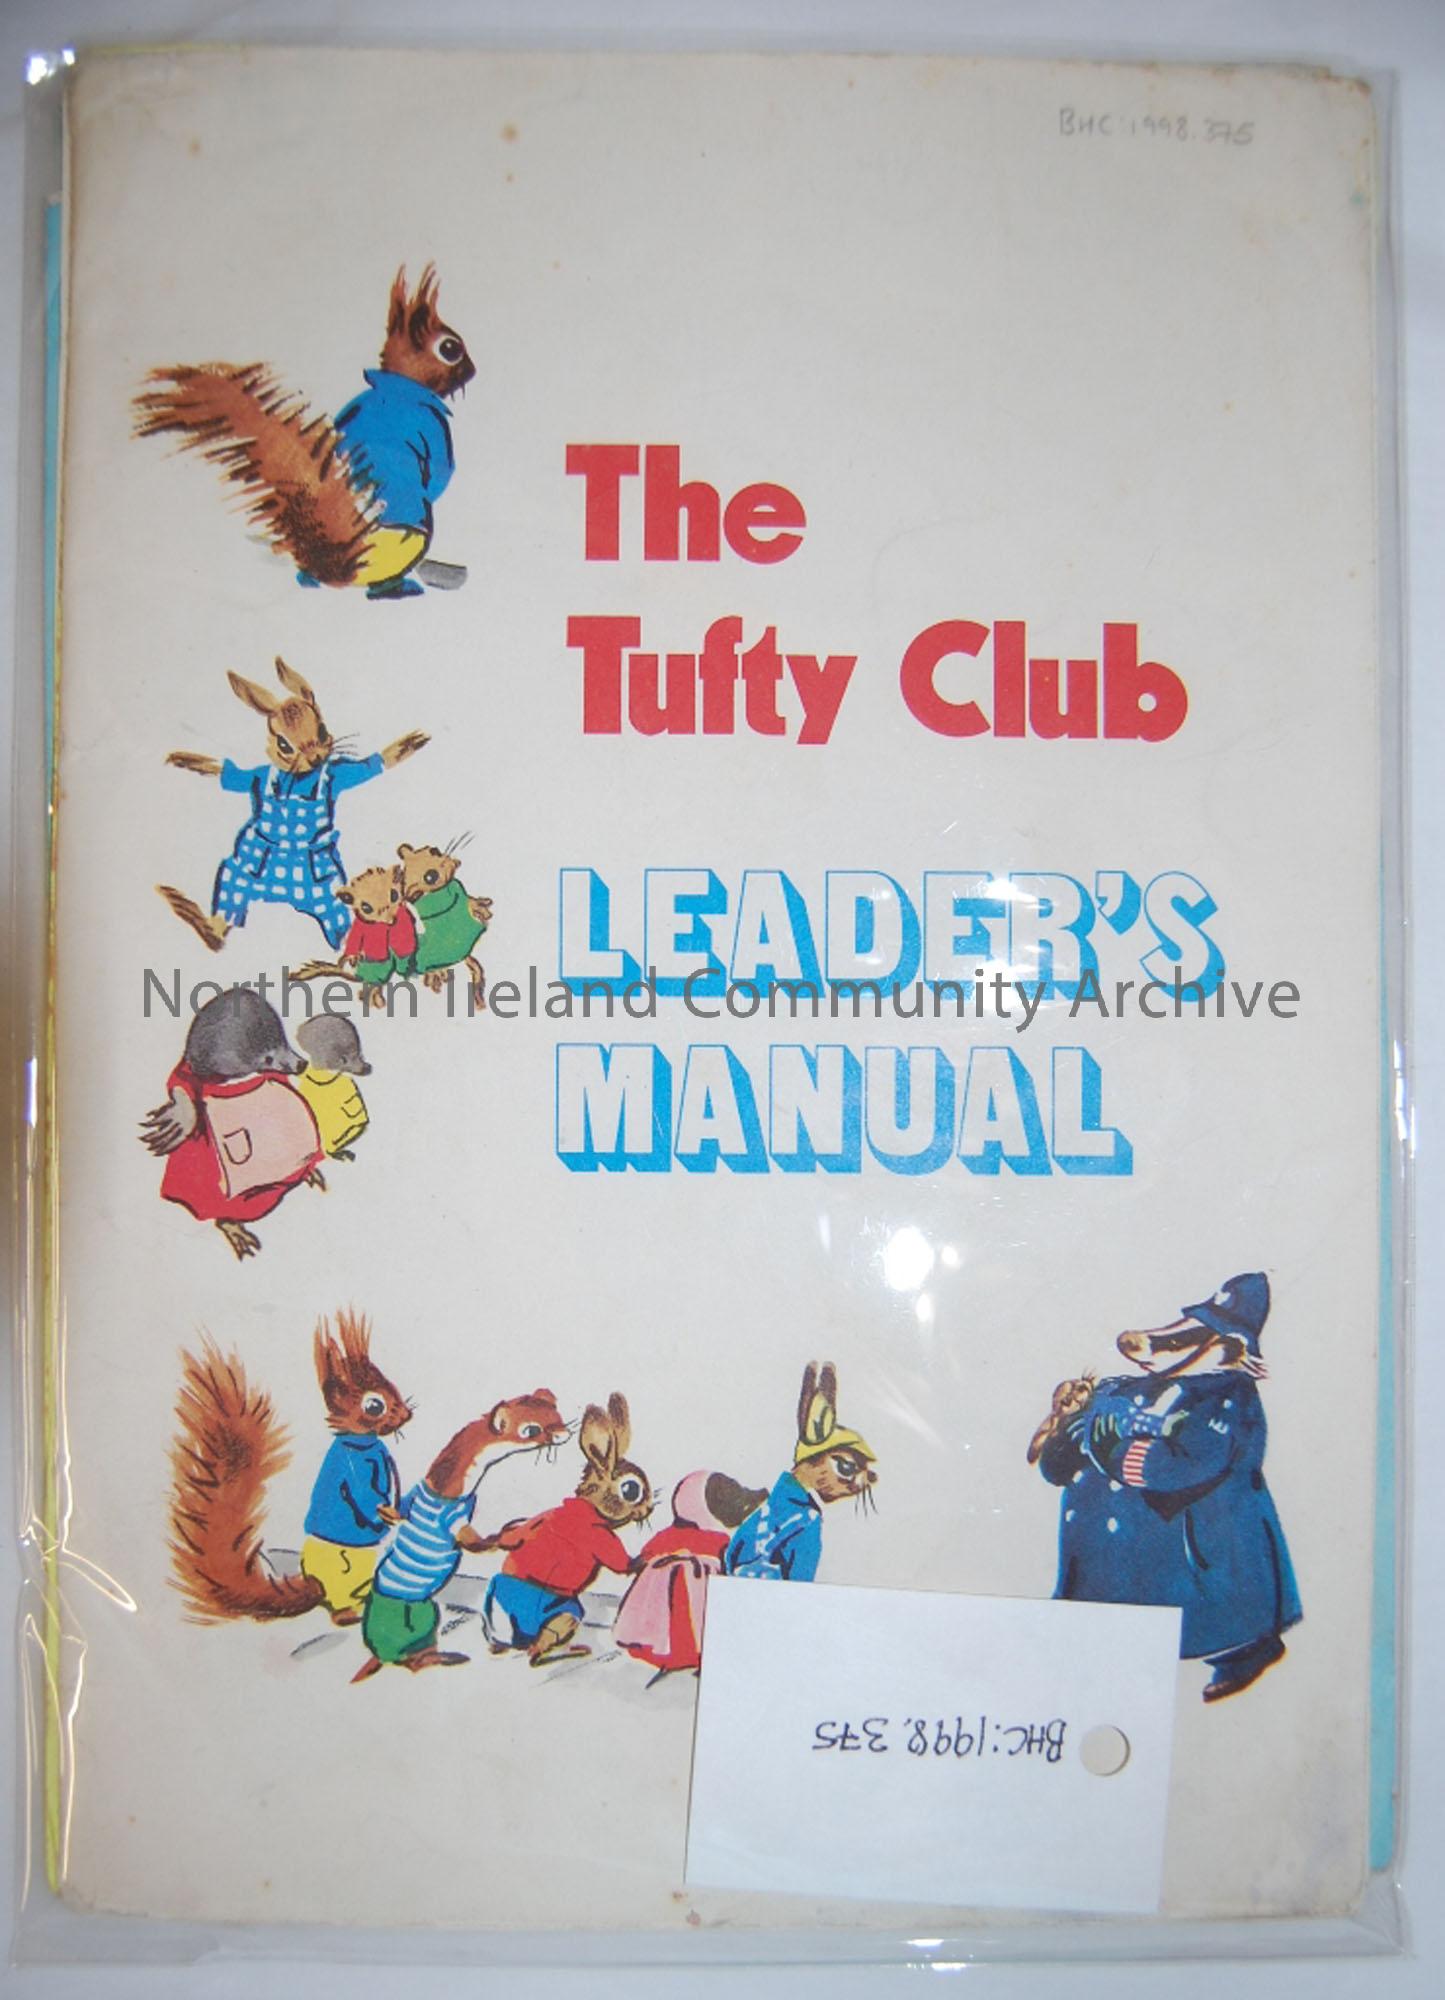 ‘The Tufty Club: Leader’s Manual’. White folder, with cartoon animals on cover. Contains teaching material for road safety.